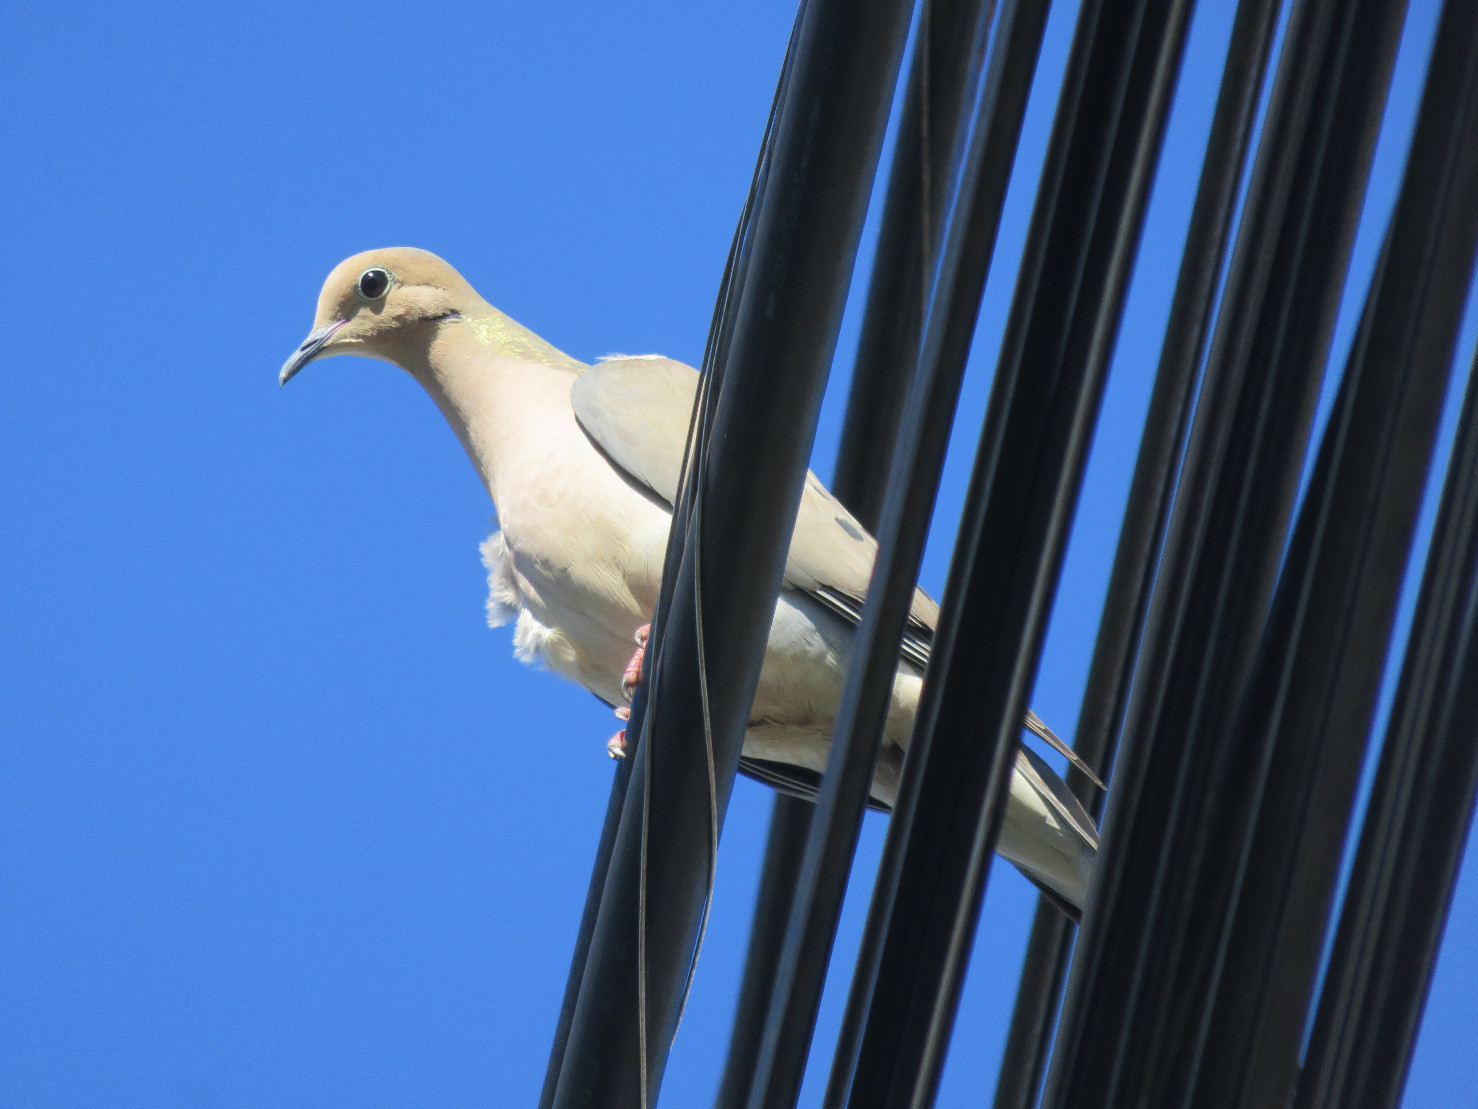 White bird on cables